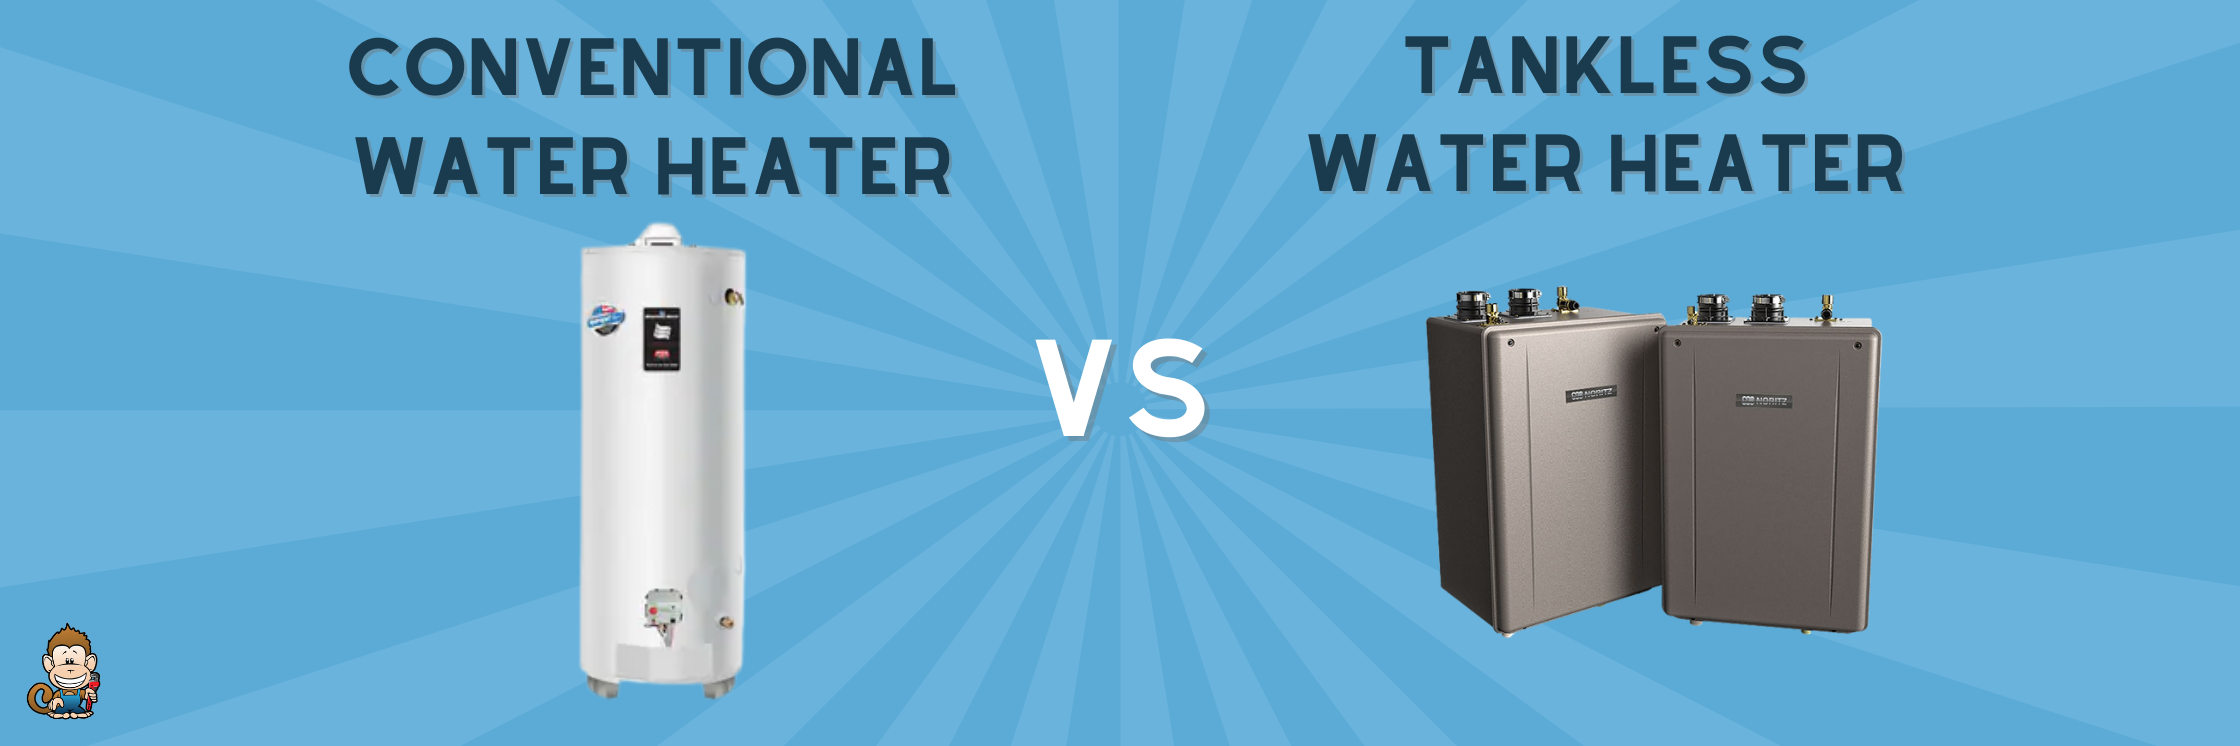 Differences Between Tankless and Conventional Water Heaters